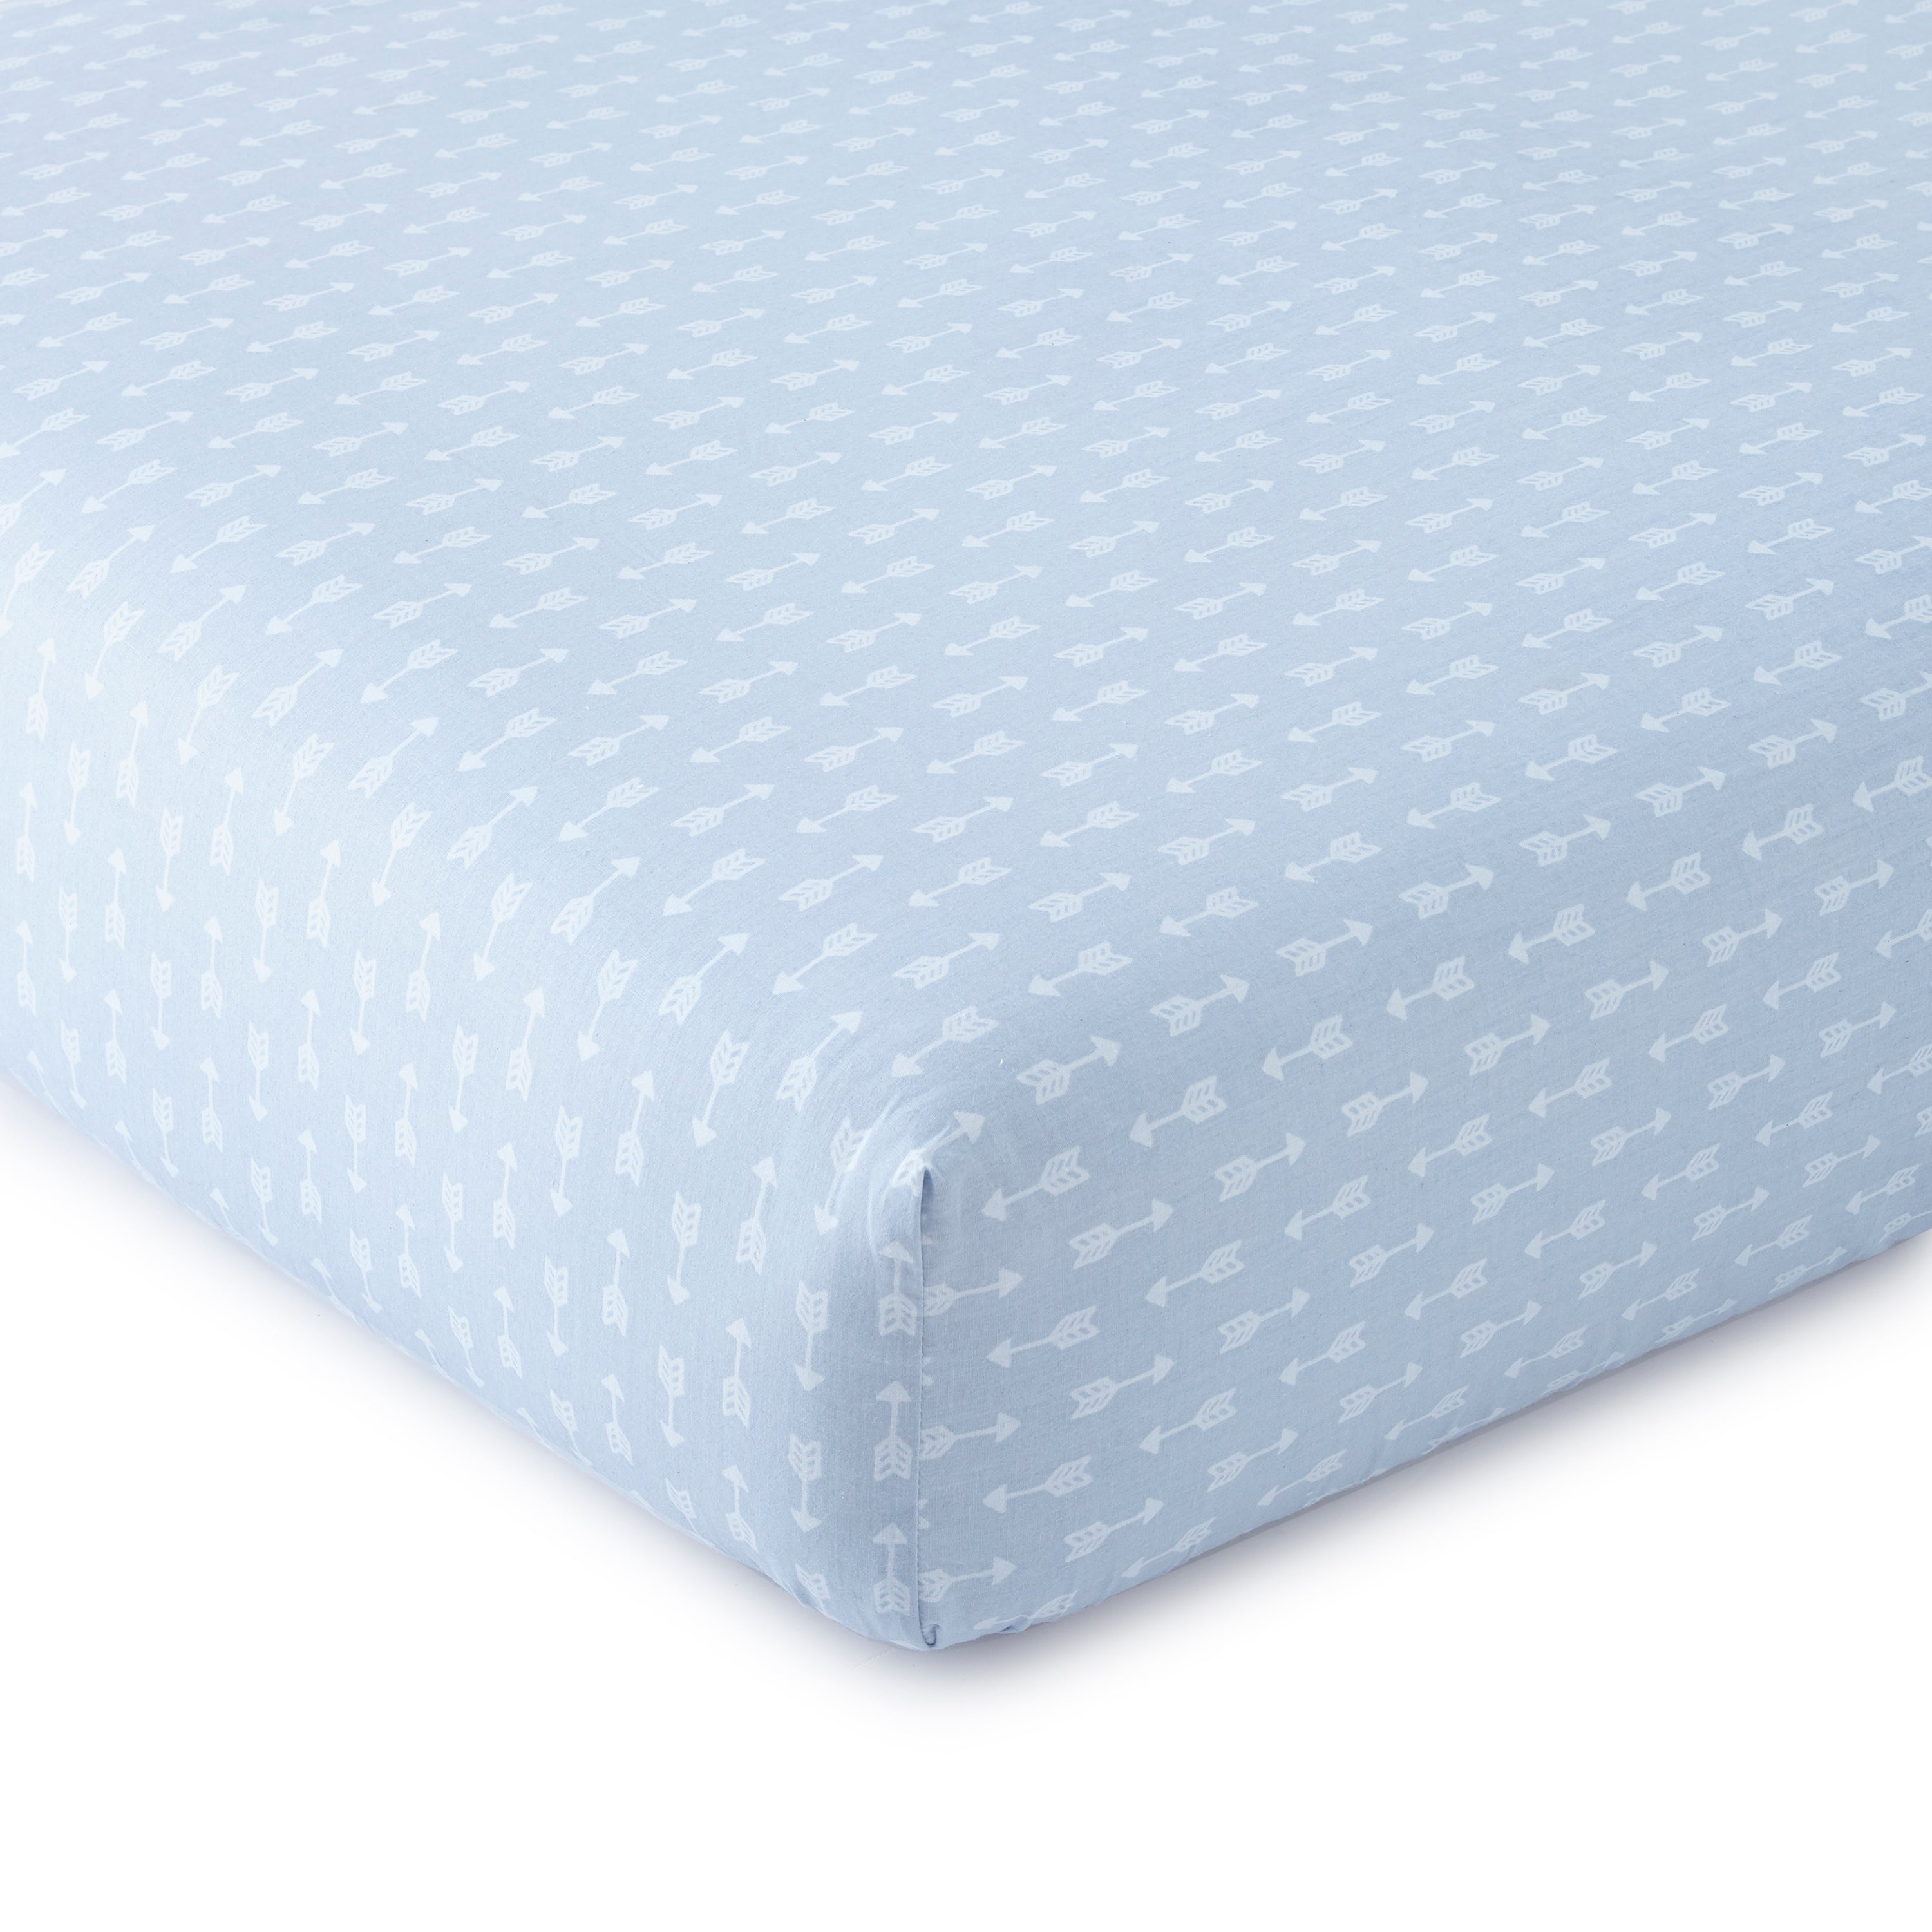 Trail Mix Cotton Crib Fitted Sheet - set of 2